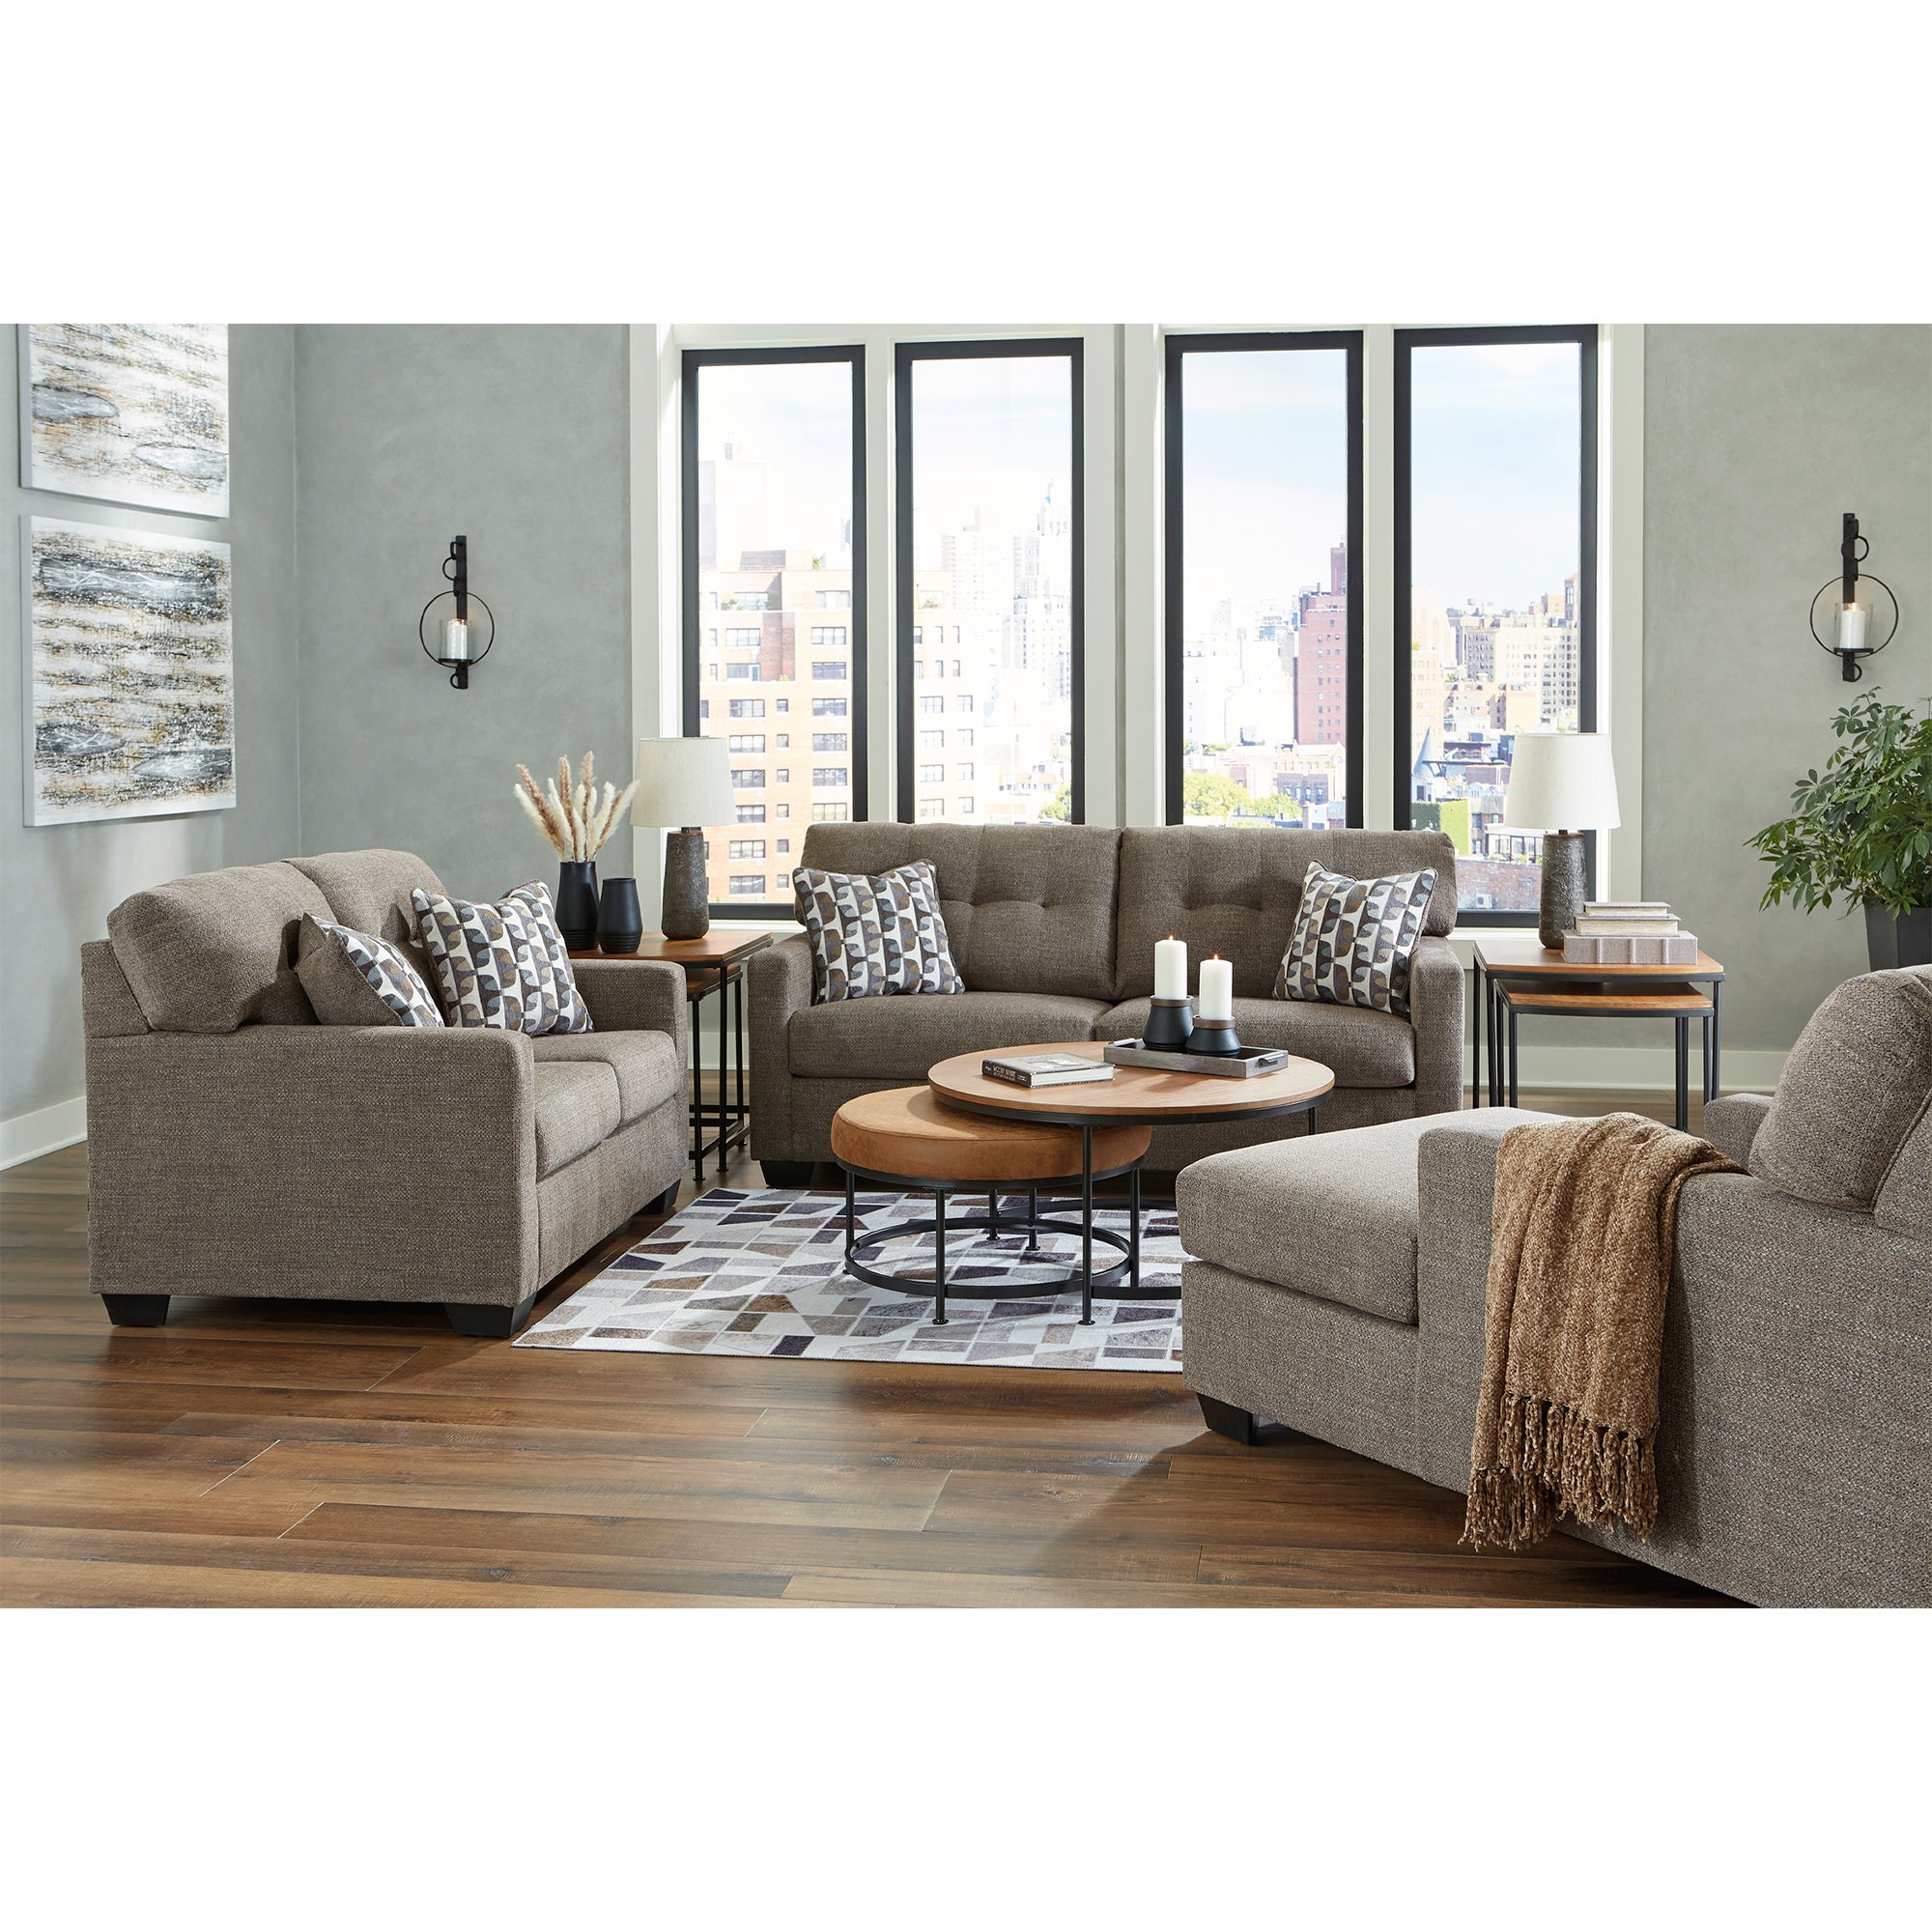 Plush Mahoney Loveseat in chocolate hue, a must-have for a cozy and inviting living space